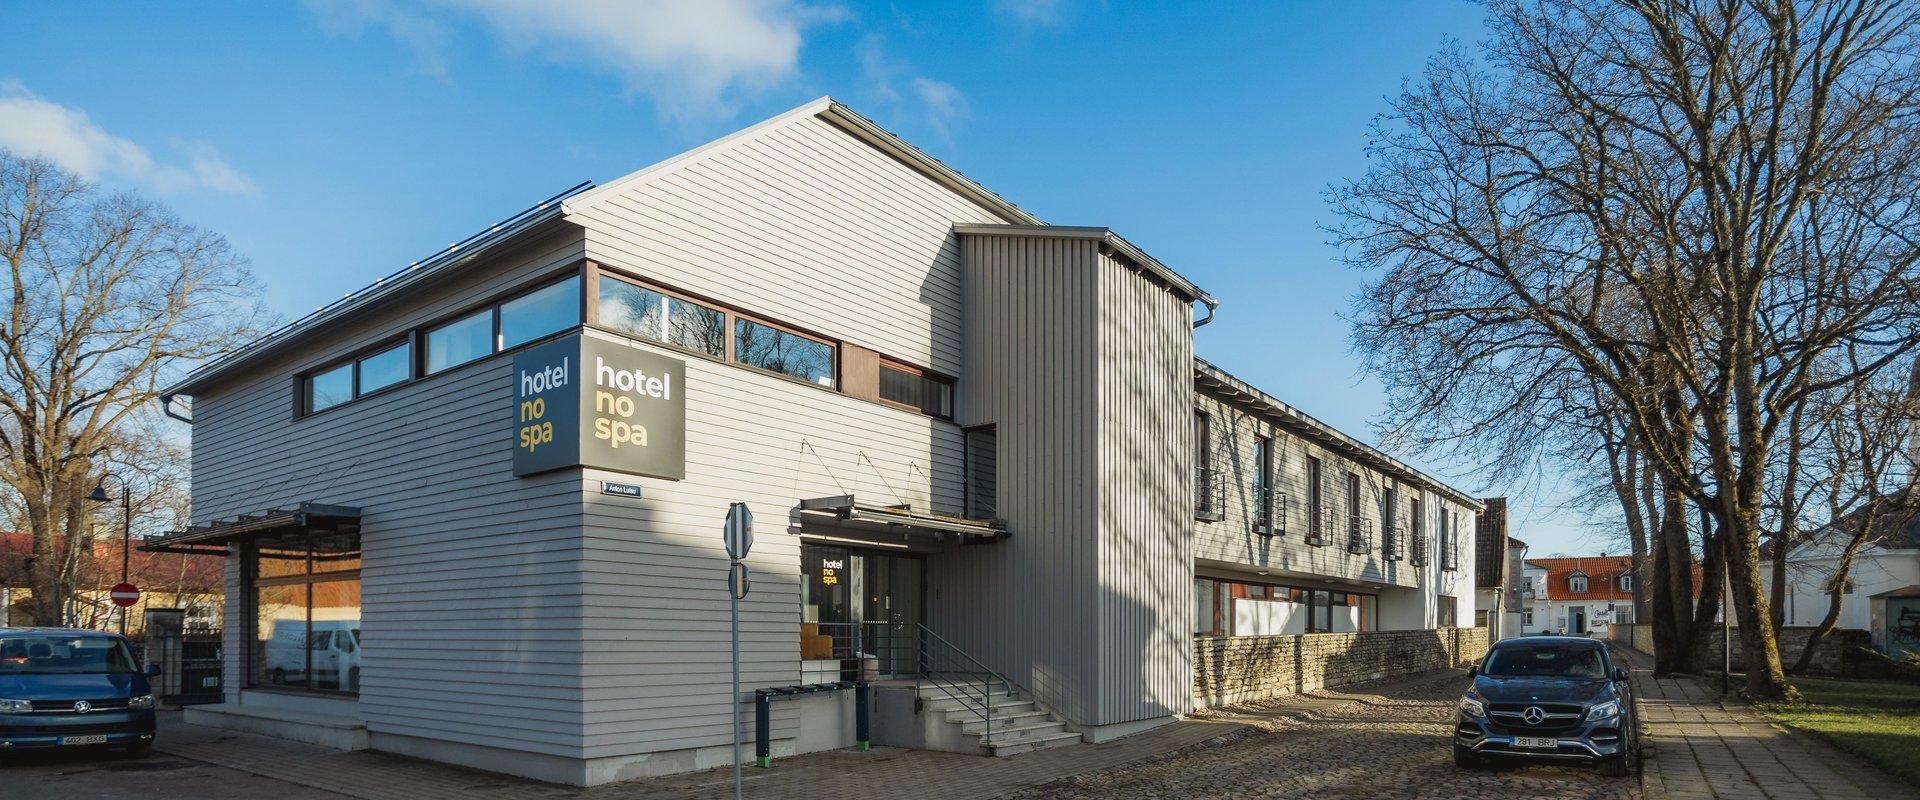 We are a small but cosy fully automatic hotel in the centre of Kuressaare. The modern building has spacious, bright, and allergy-free rooms. There are